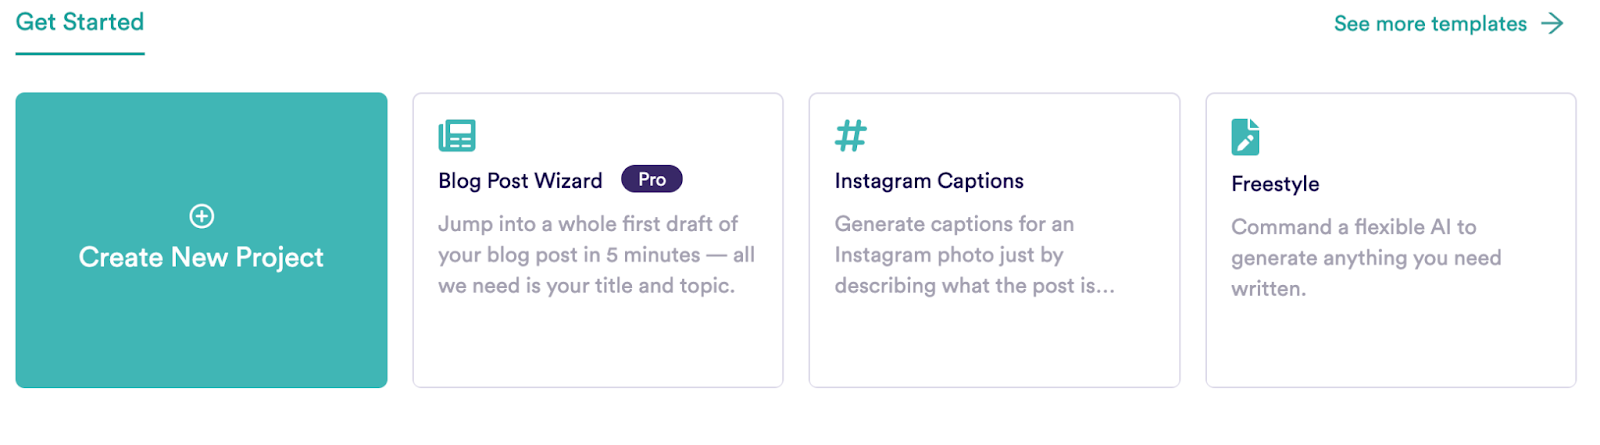 The image displays a button to create a new project or use one of the most popular tools, including Blog Post Wizard, Instagram Captions, or Freestyle.